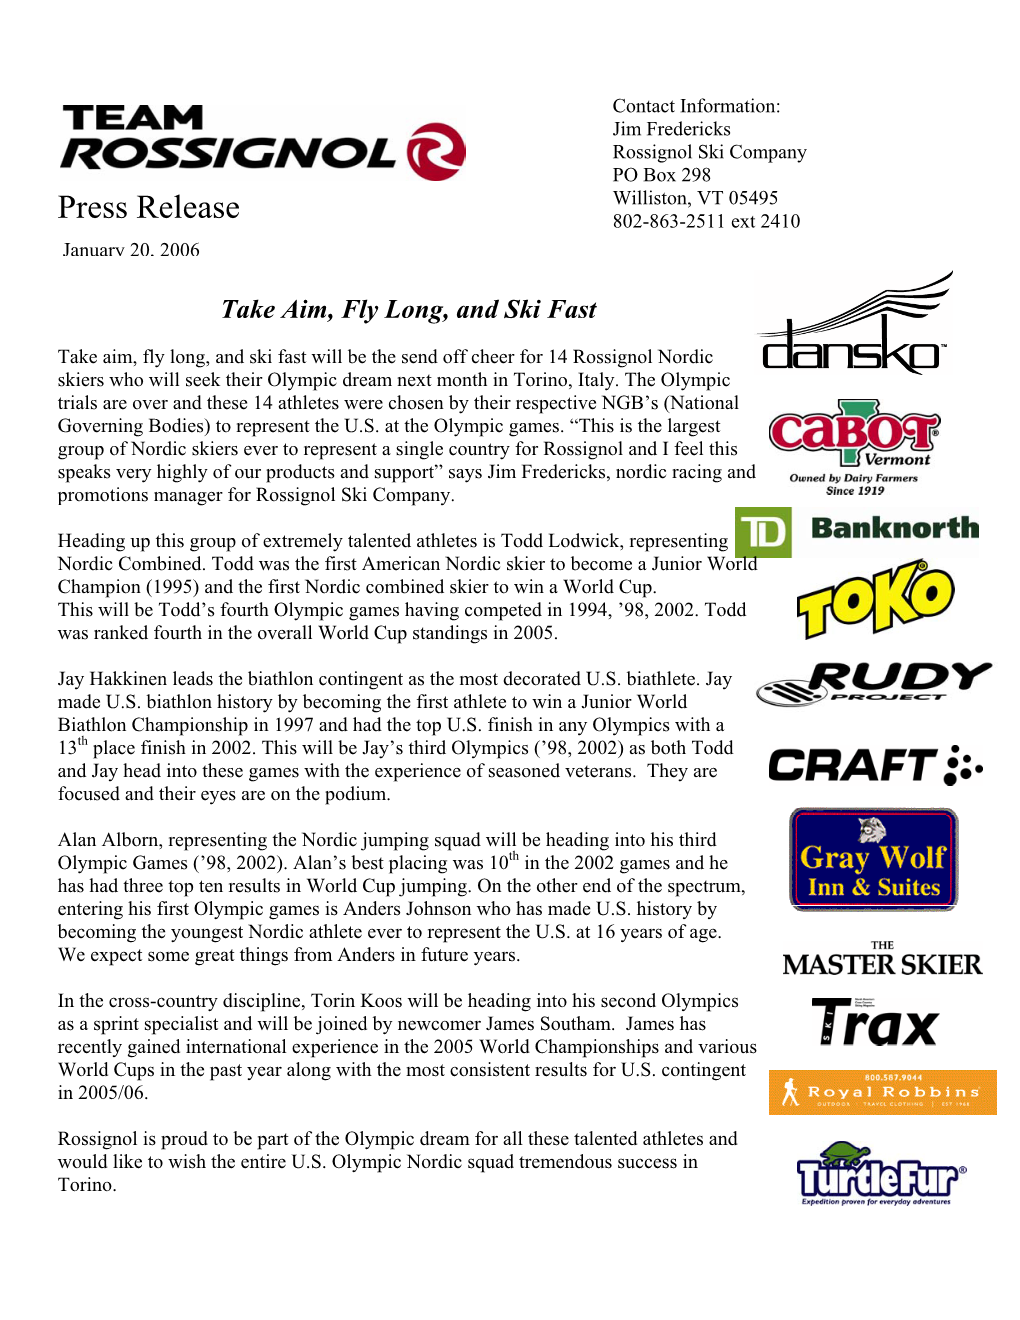 Press Release 802-863-2511 Ext 2410 January 20, 2006